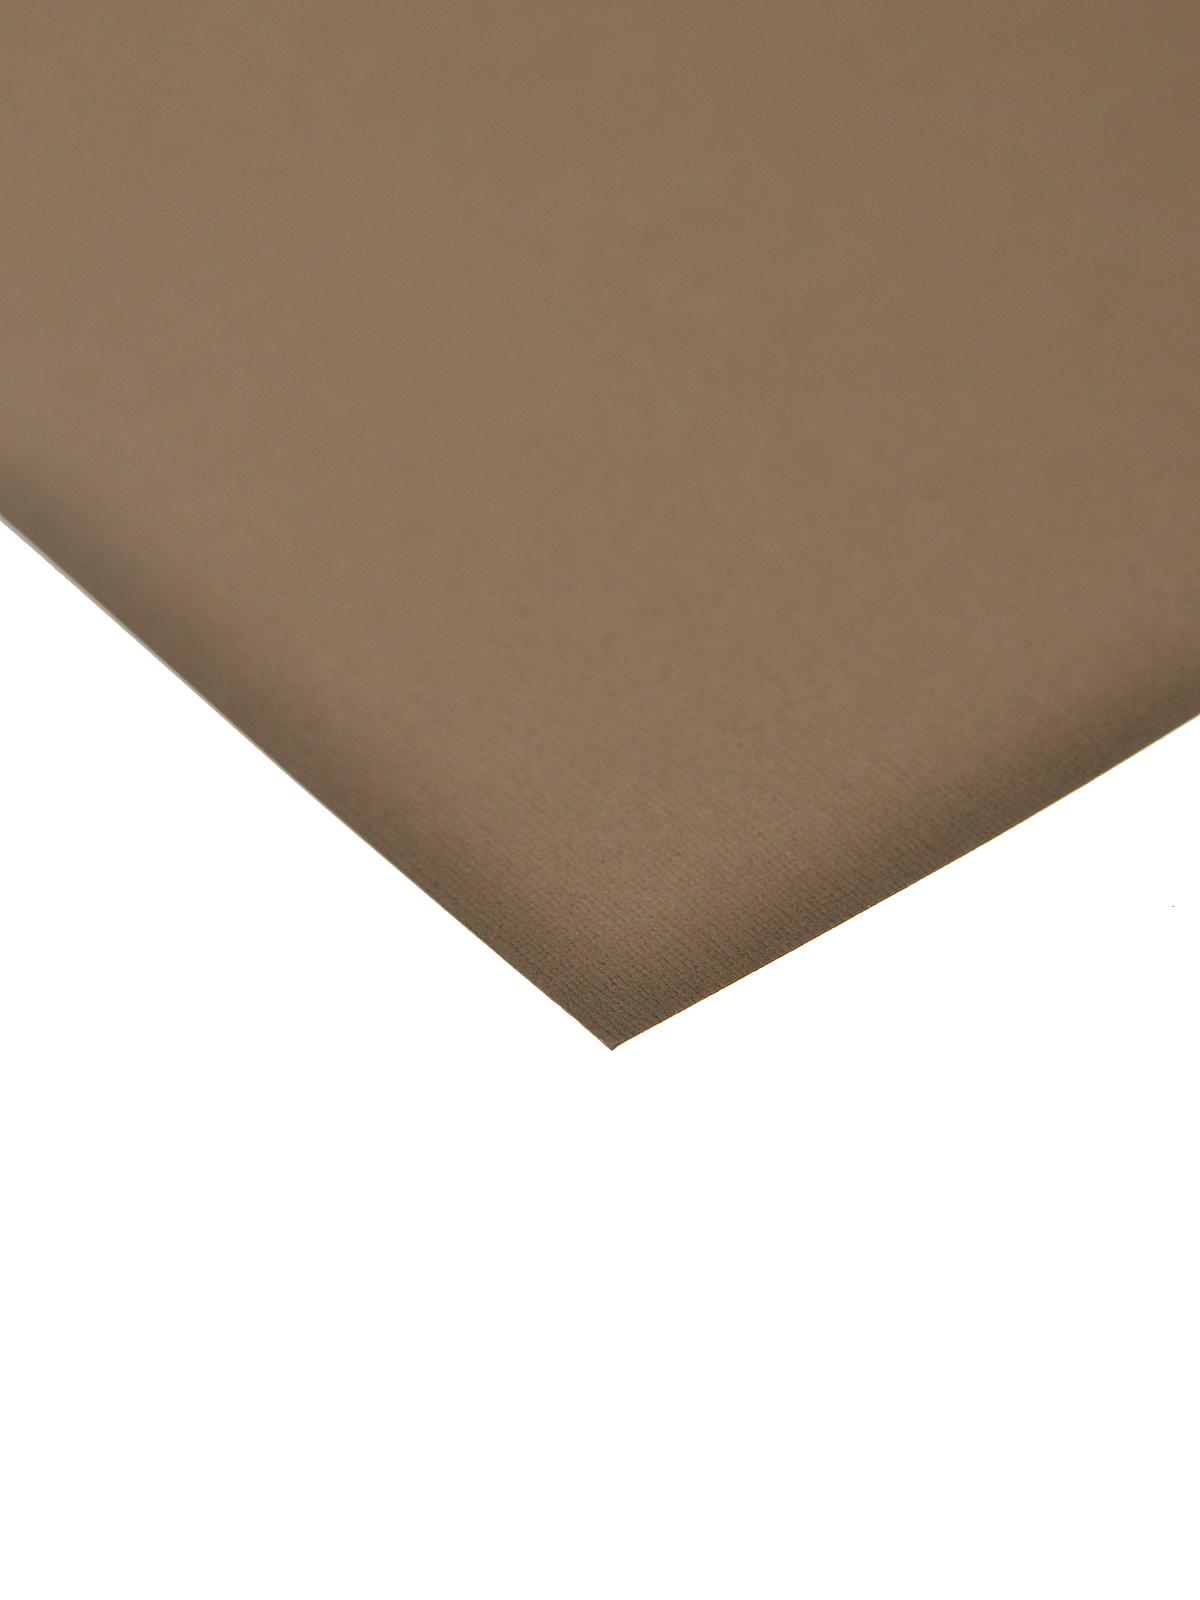 80 Lb. Canvas 8.5 In. X 11 In. Sheet Cafe Ole